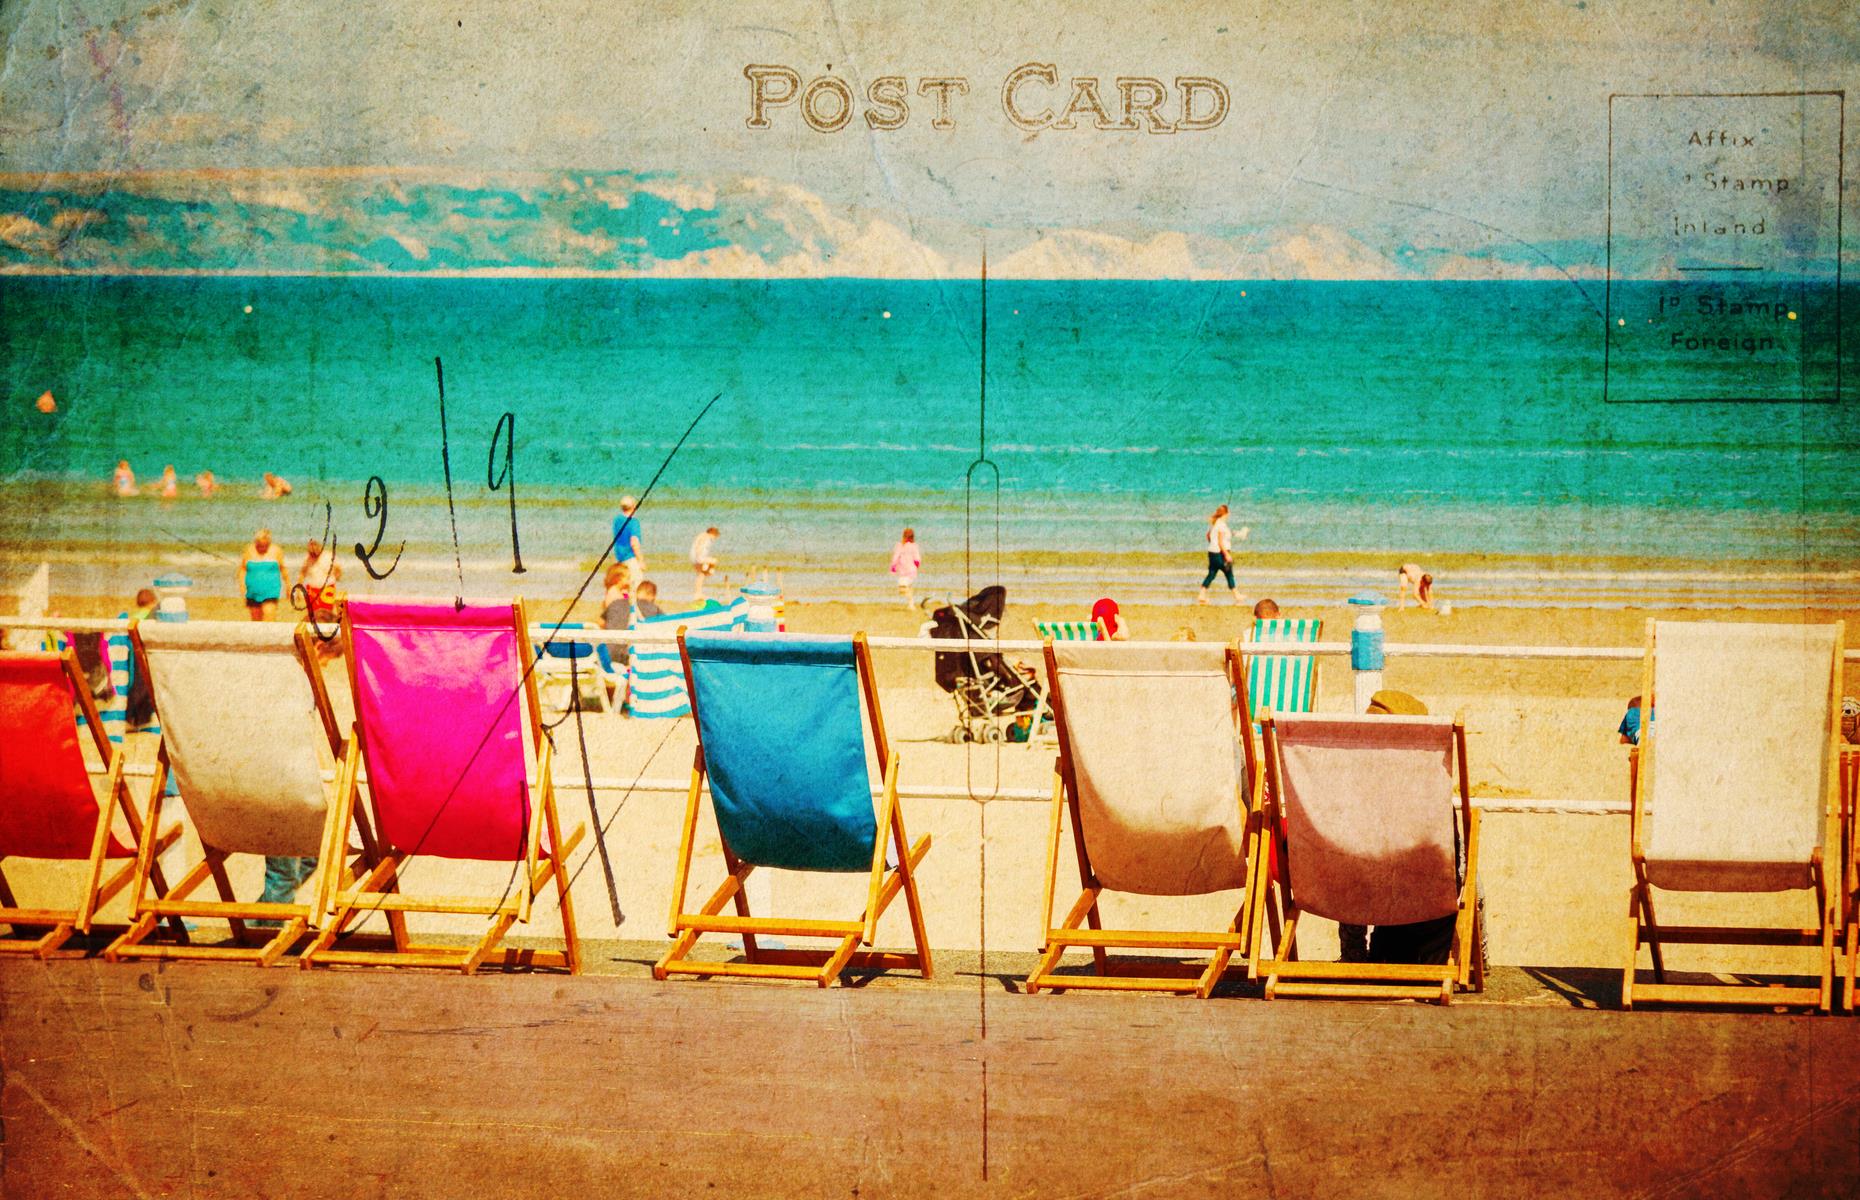 <p>In 1918, the half-penny postage rose to a penny which led to a decline in the popularity of sending postcards so frequently. But the vacation postcard came into its own as the British seaside became an increasingly popular tourist destination after the war. Sending a postcard to those back home became an essential part of vacation tradition. </p>